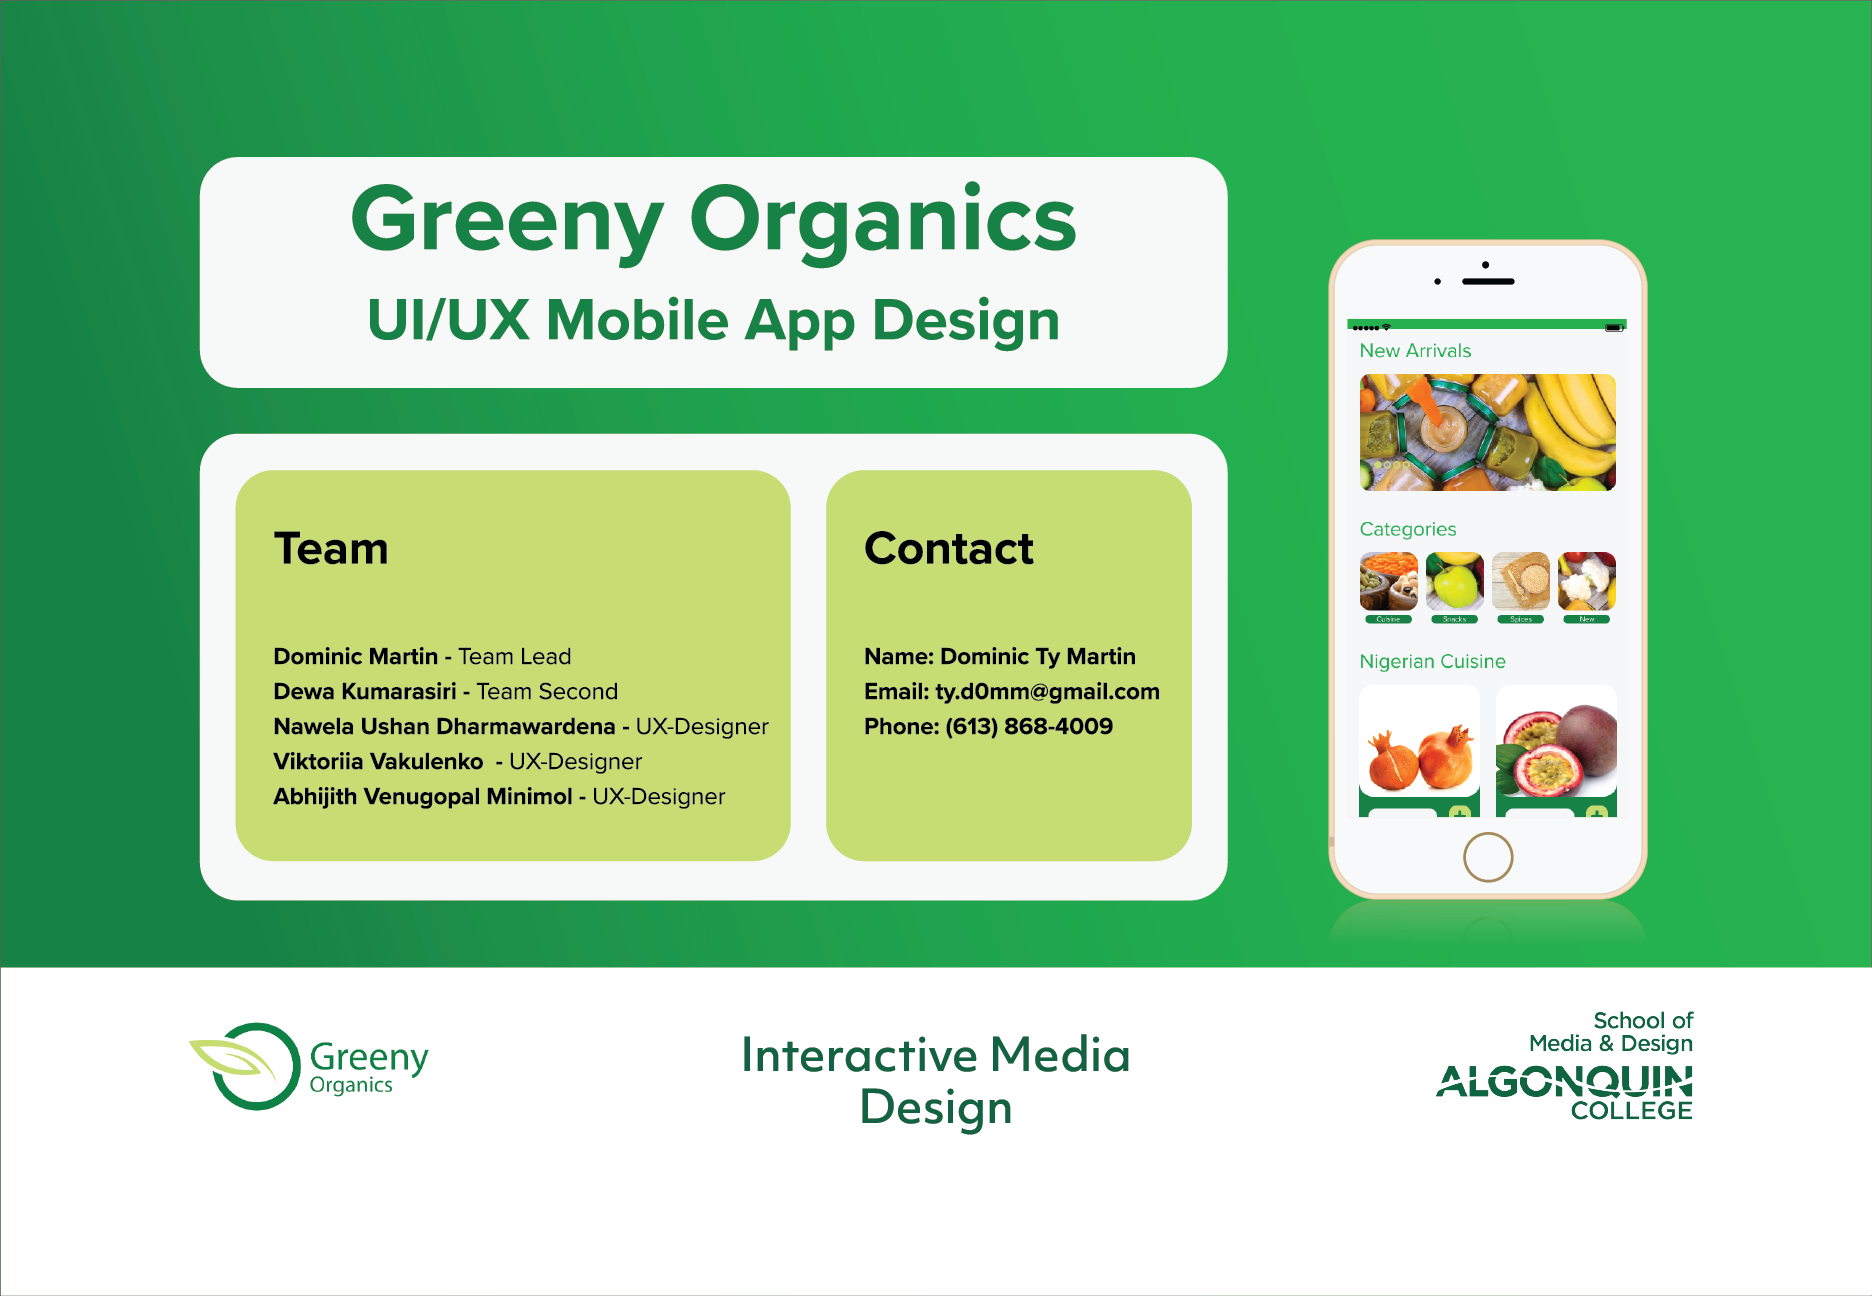 Poster for Greeny Organics UI/UX Mobile App Design that contains a Hi-Fi mockup of Shop page, with Team and Contact sections right beside